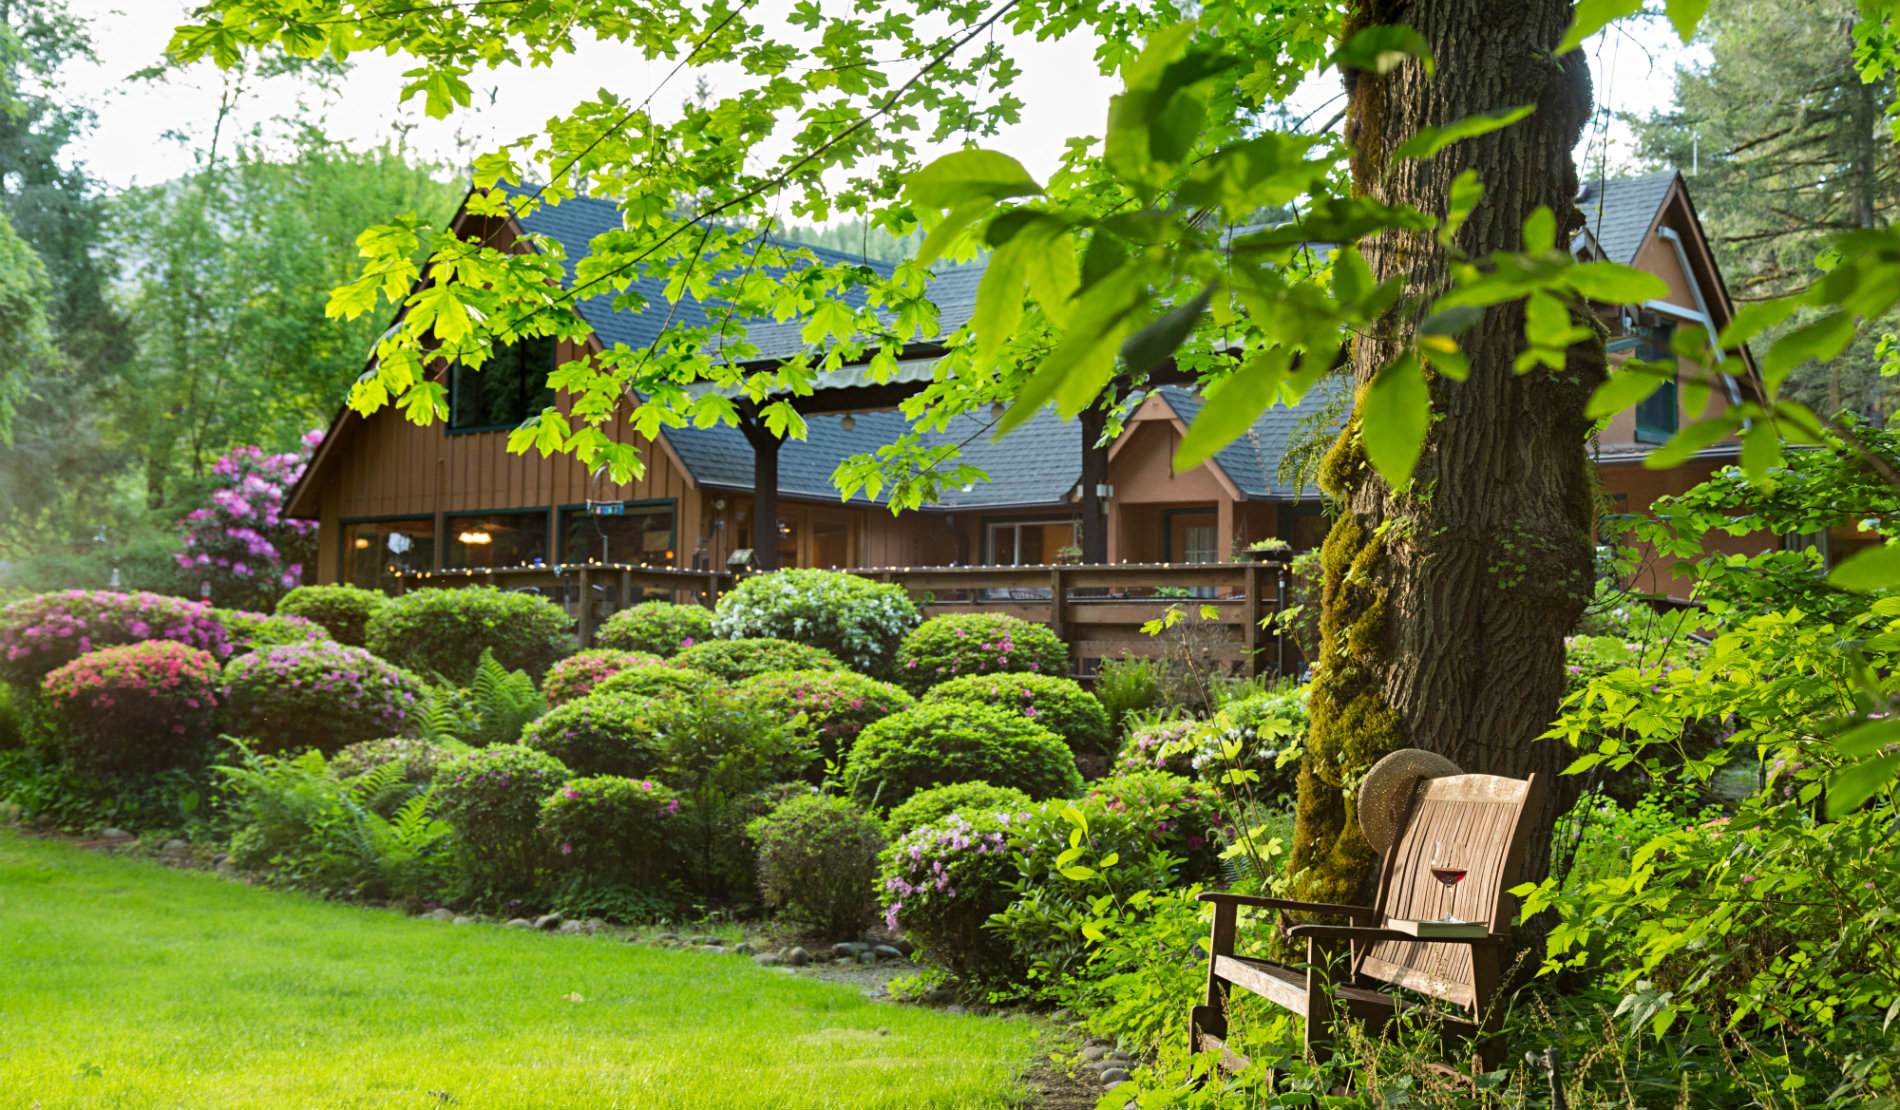 A wooden bench to rest on with blooming red and pink azaleas and the lodge in the background